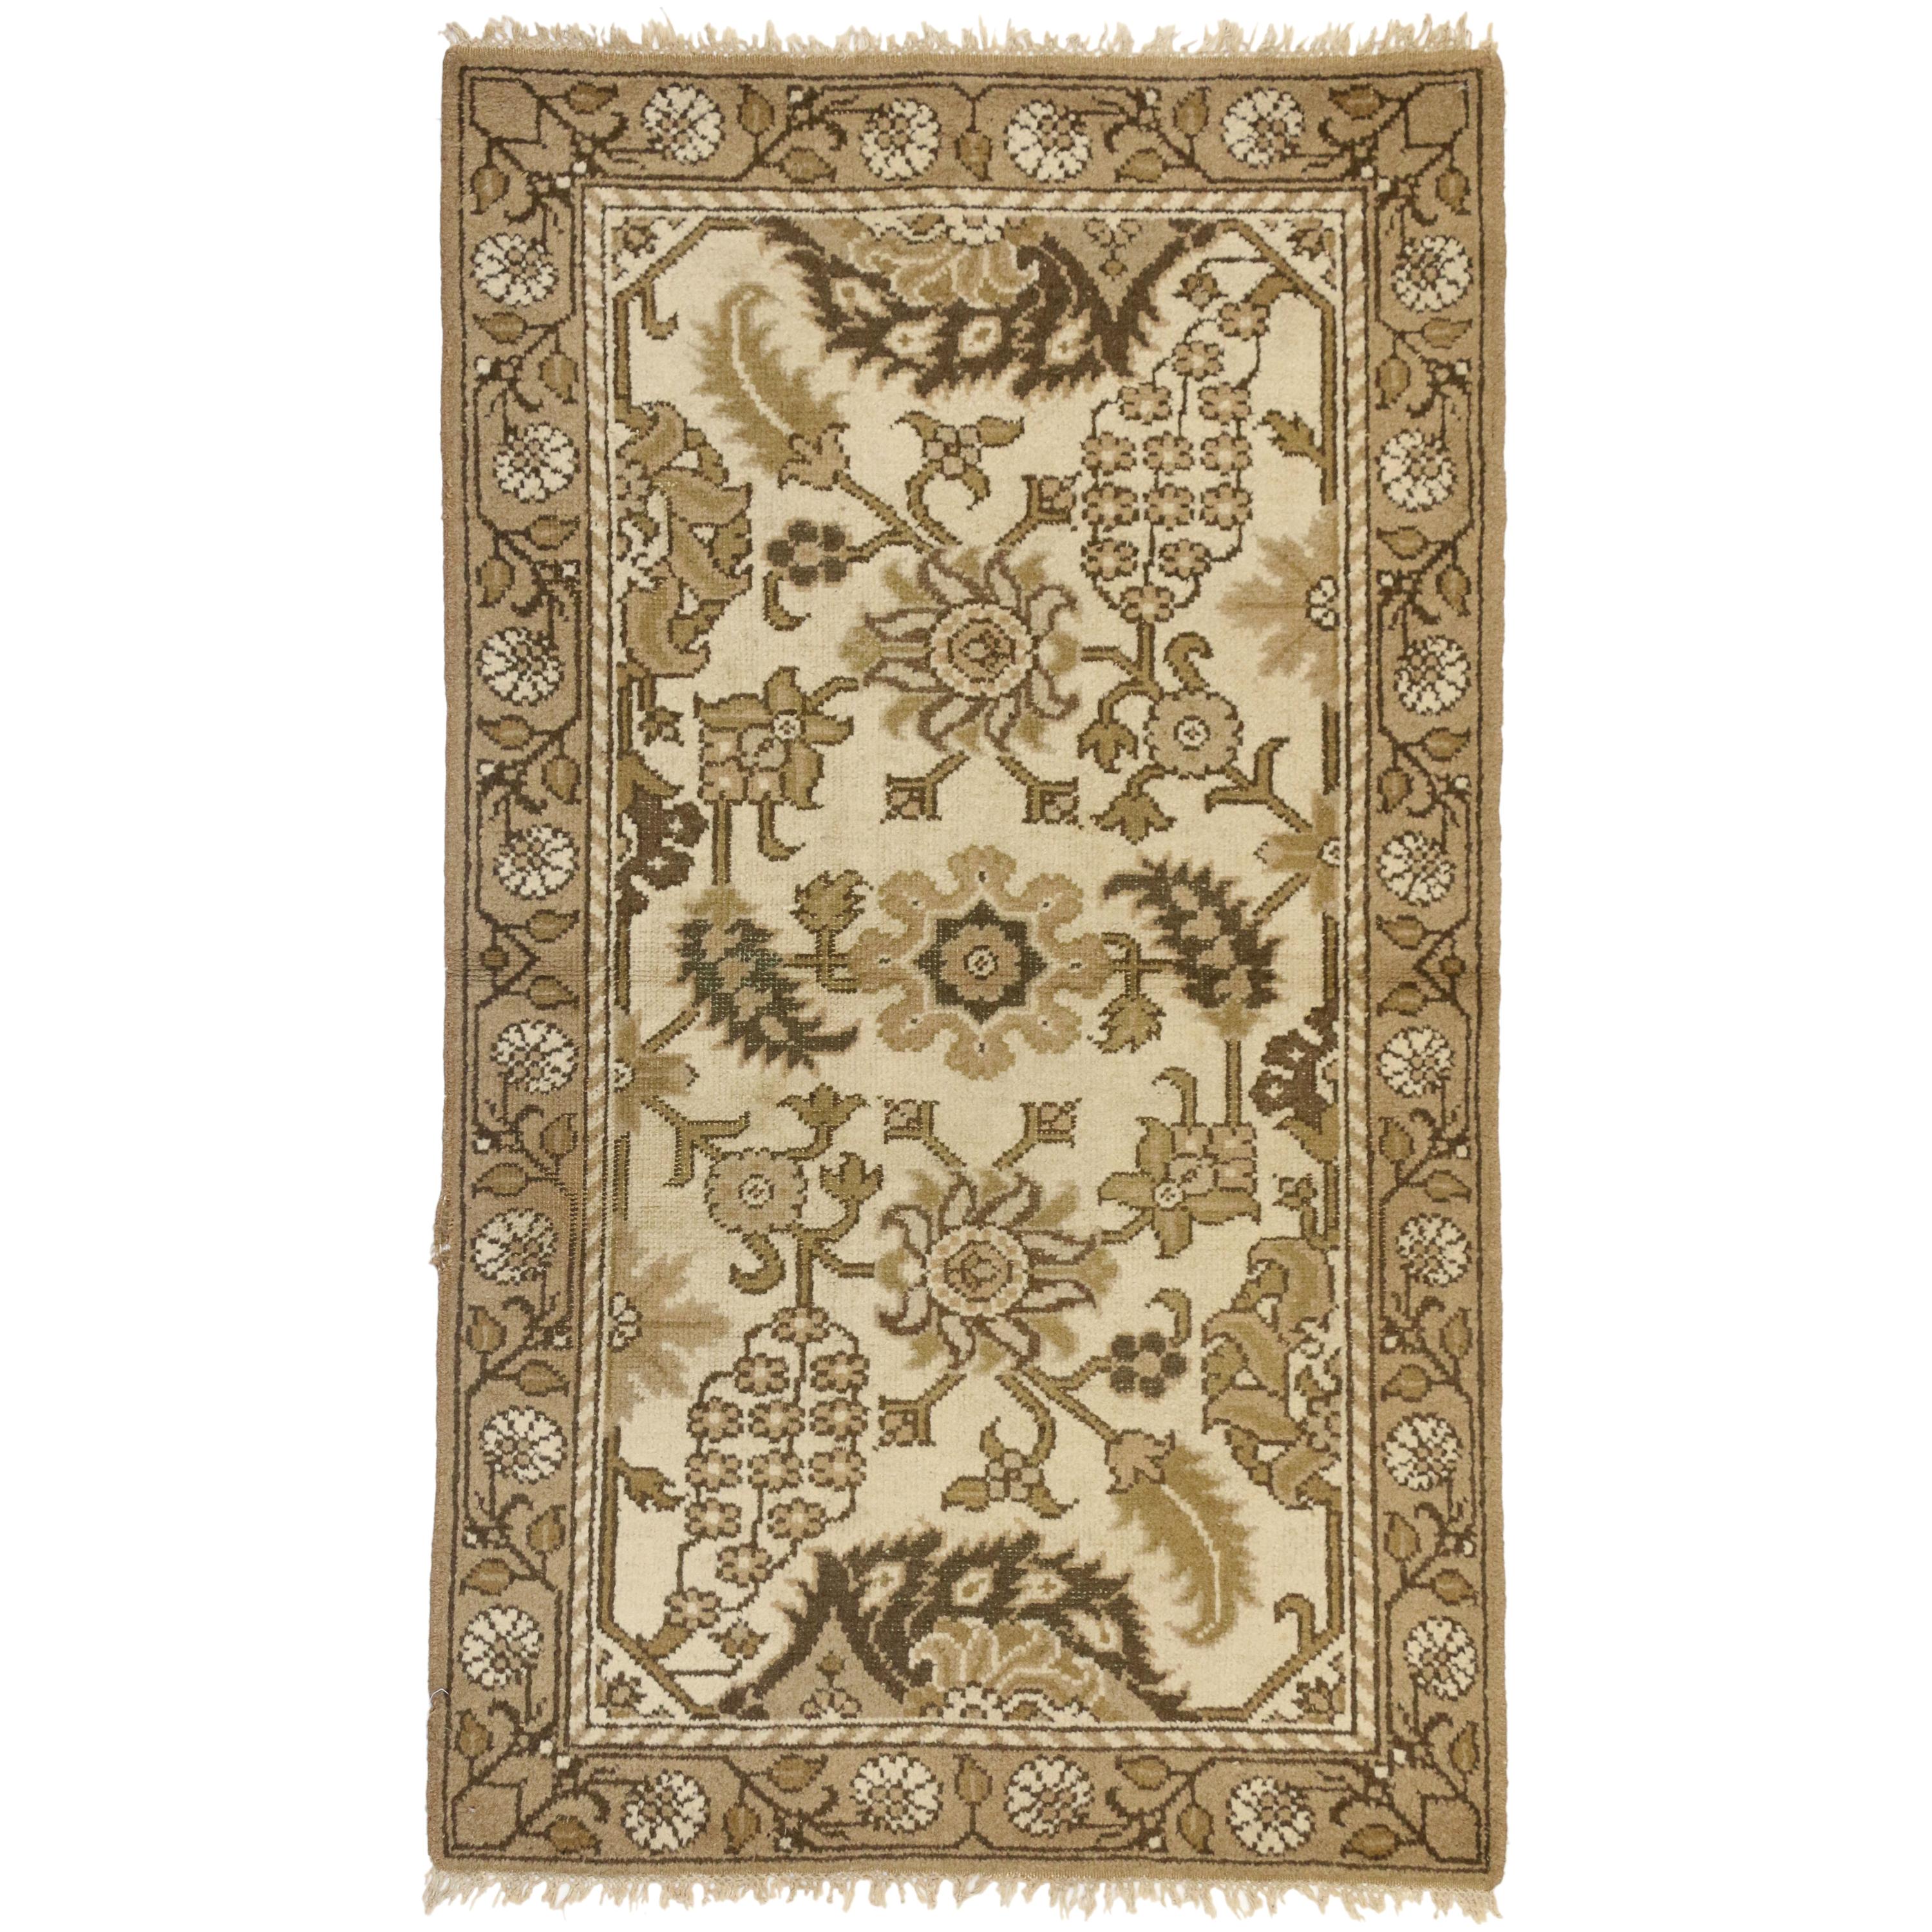 Distressed Antique Indian Agra Rug with Modern Rustic Shaker Style